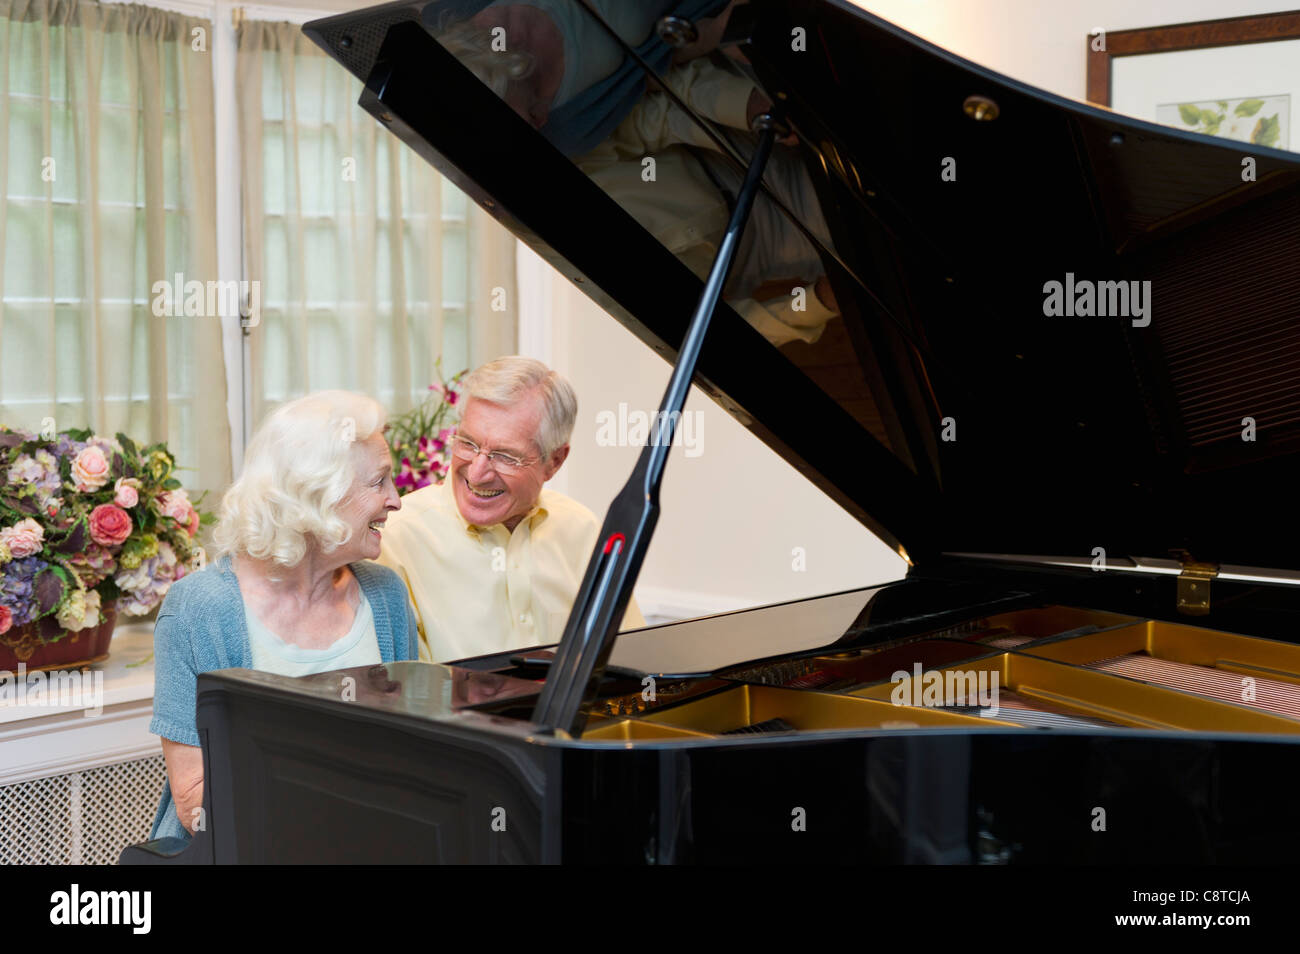 USA, New York State, Old Westbury, Senior couple playing piano Banque D'Images